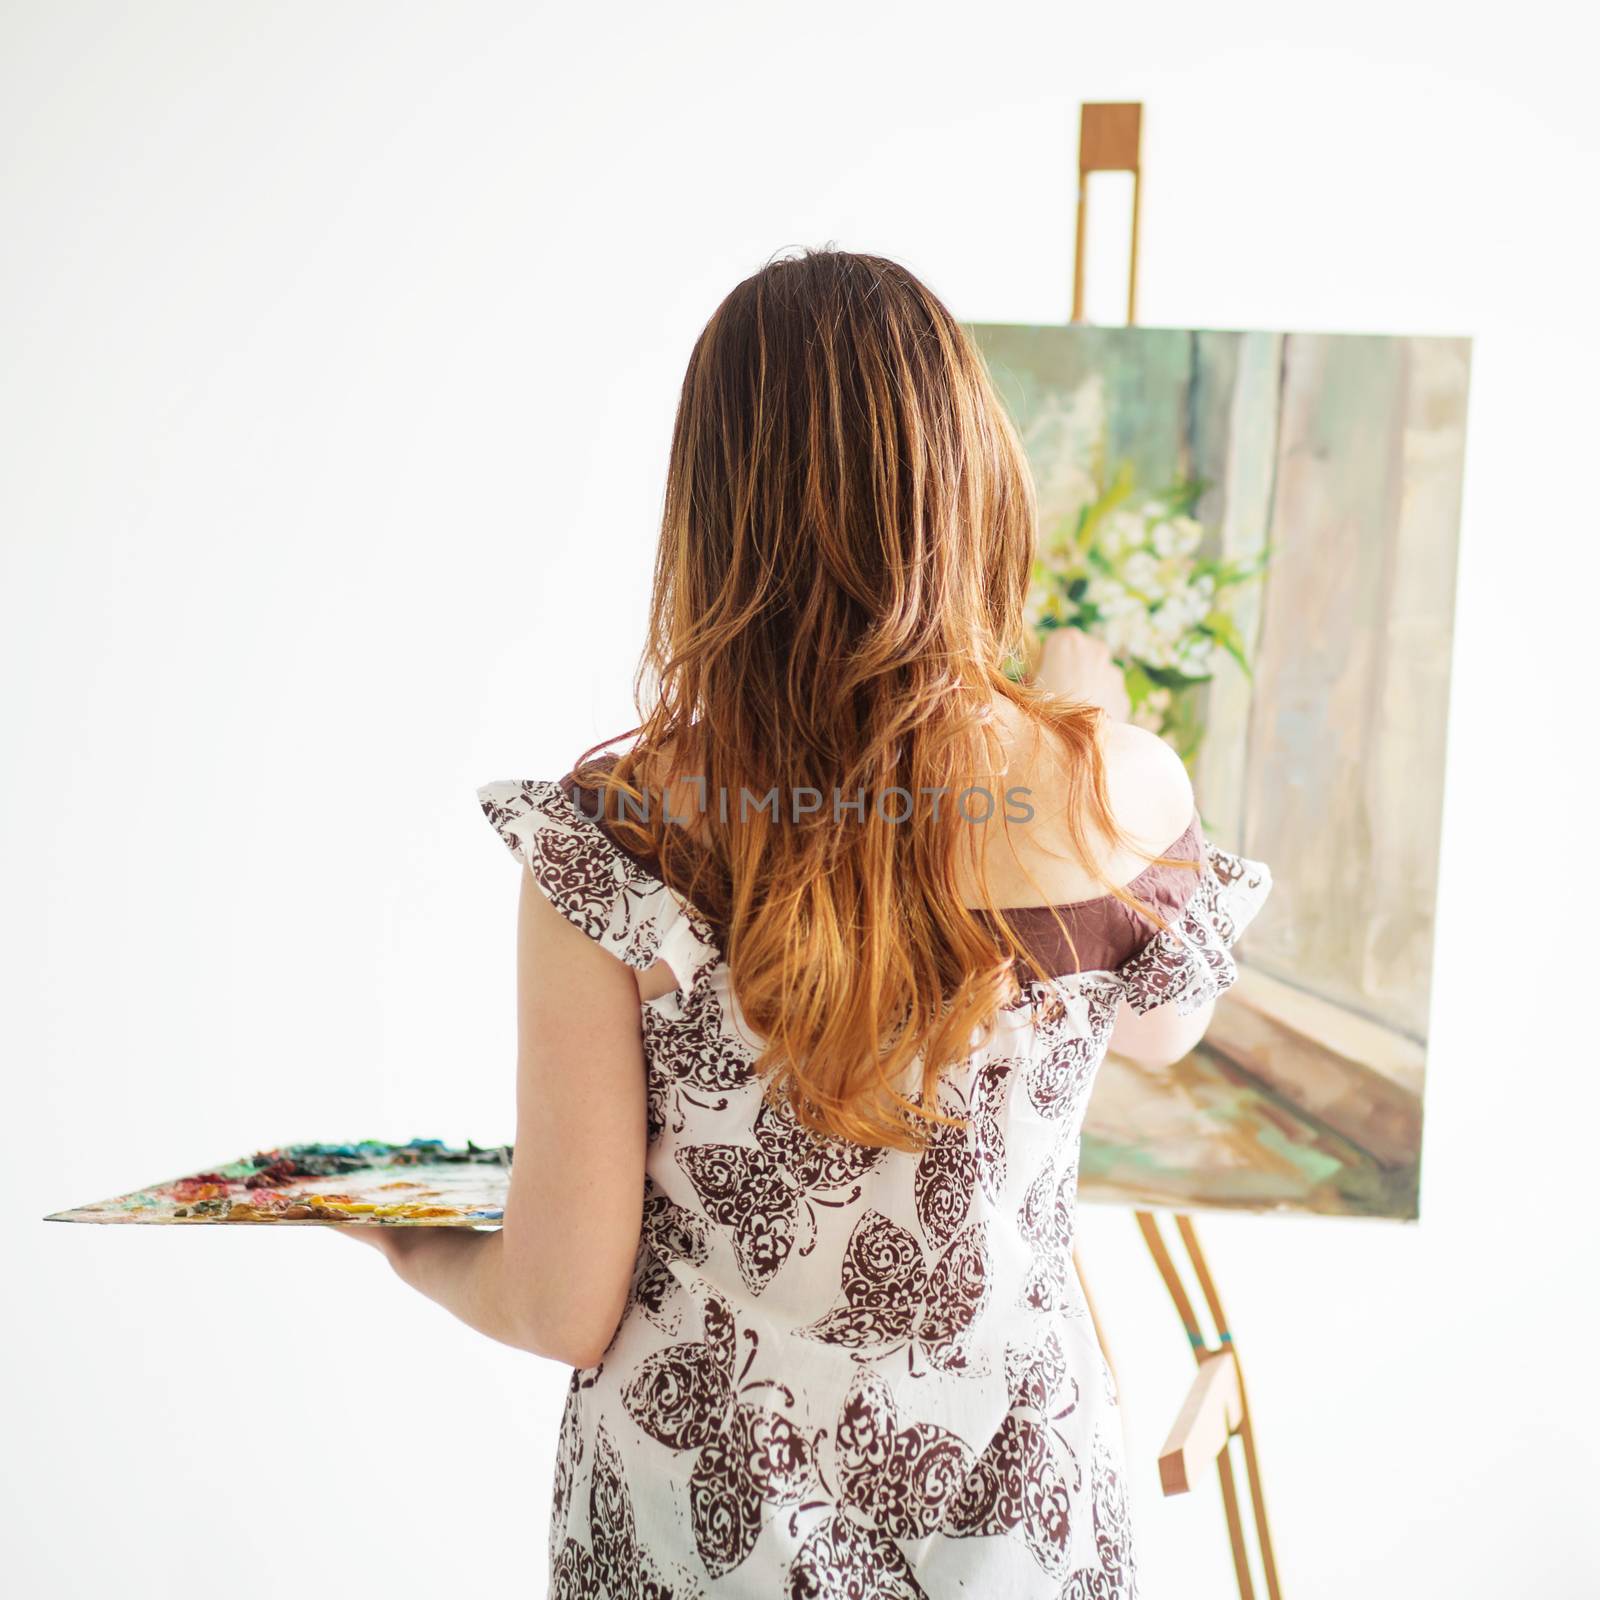 Woman Painting on a Canvas against white background. Back view.